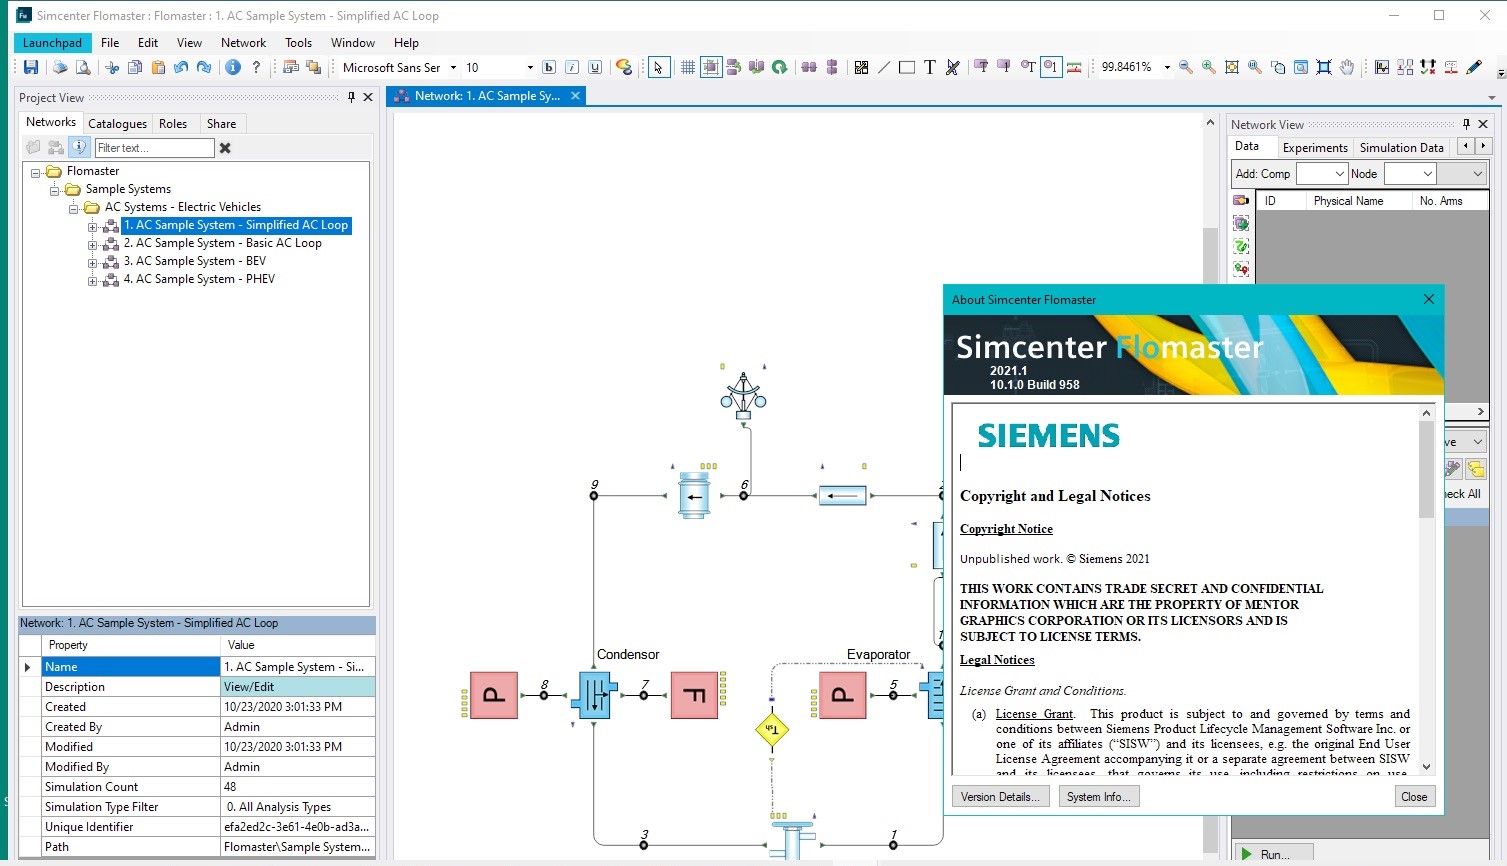 Working with Siemens Simcenter Flomaster 2021.1 Win64 full